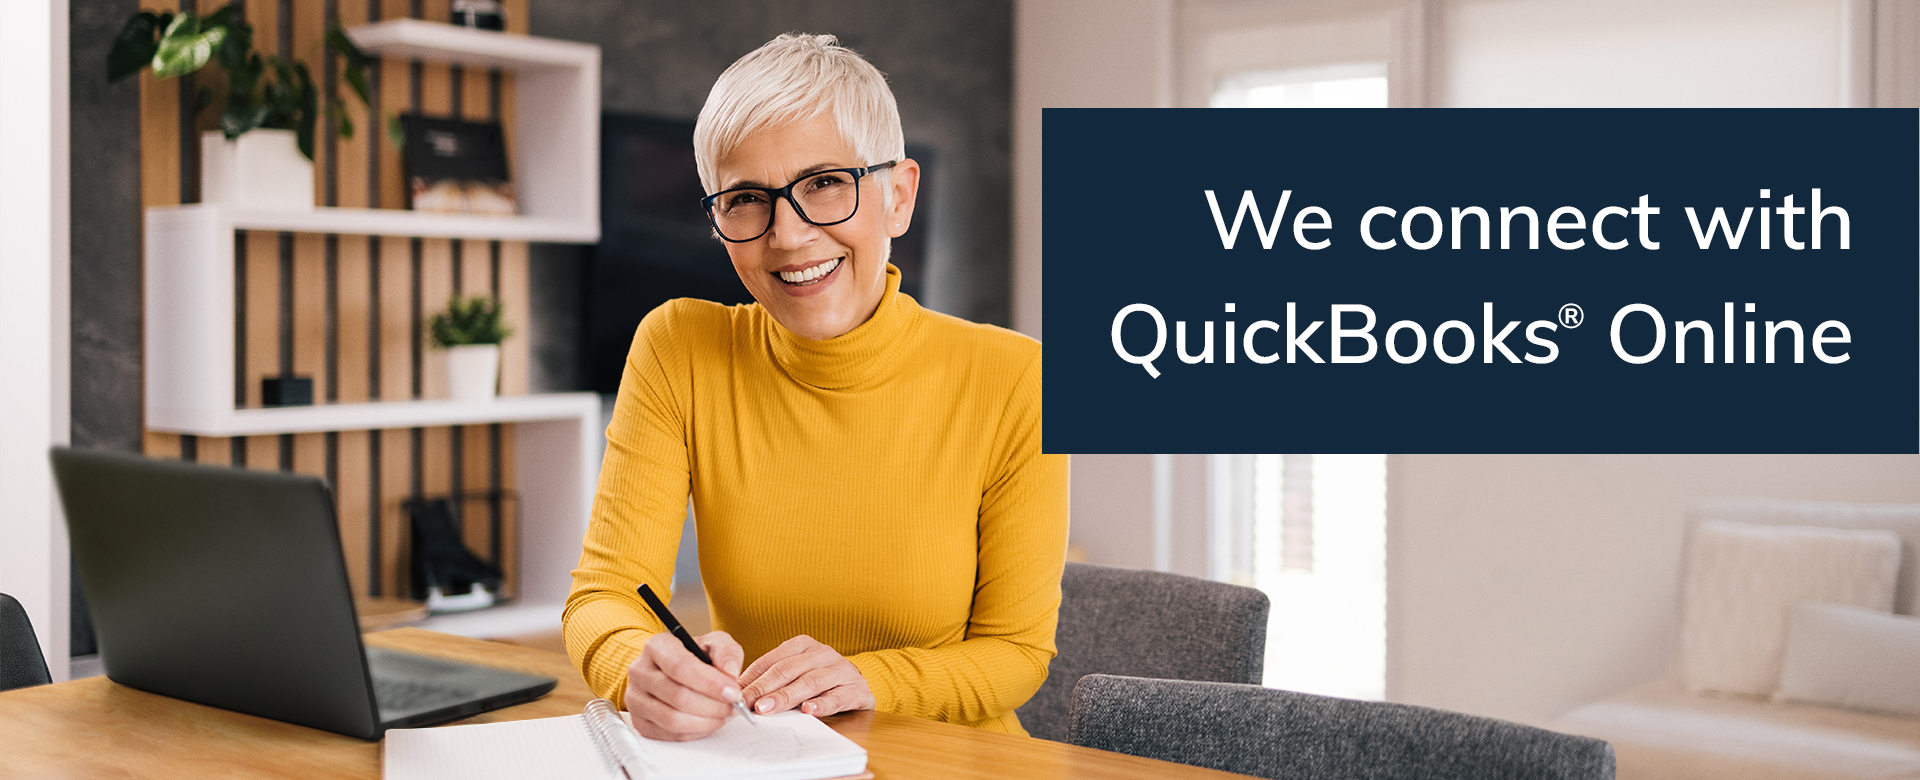 Connect with Quickbooks